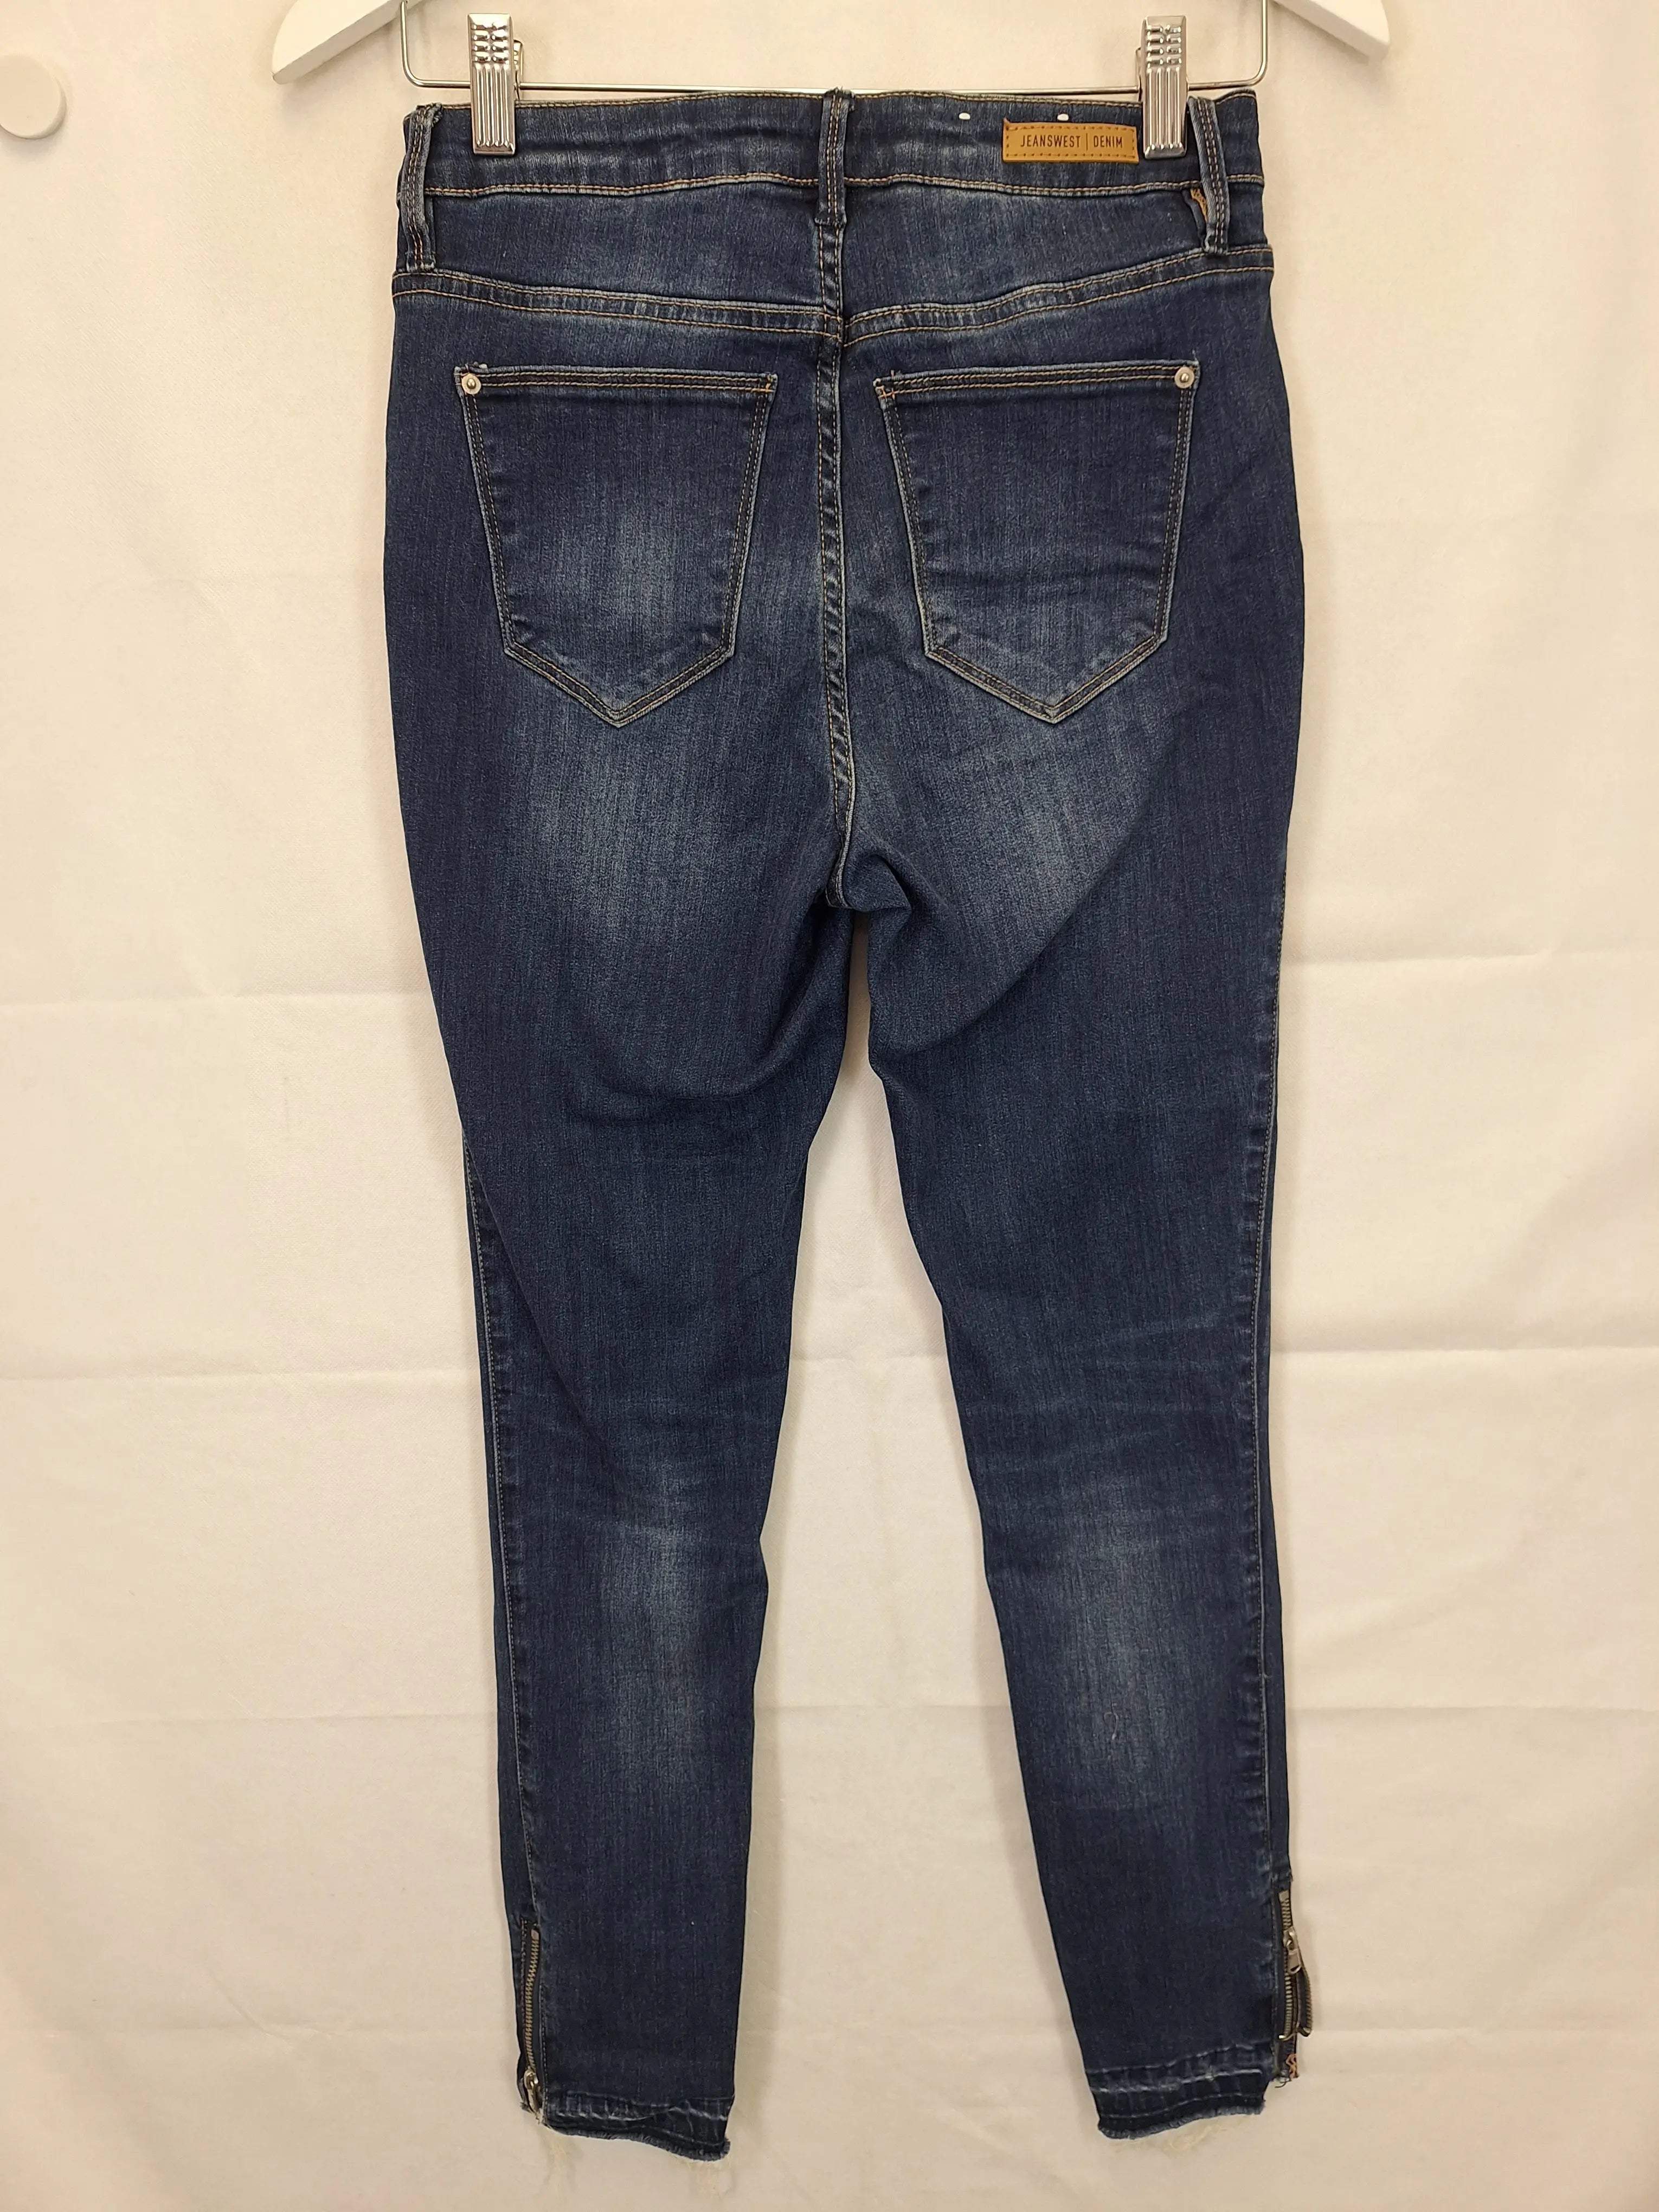 Jeanswest Curve Embracer Skinny Jeans Size 8 by SwapUp Online Second Hand Store Thrift Store Op Shop 20705626